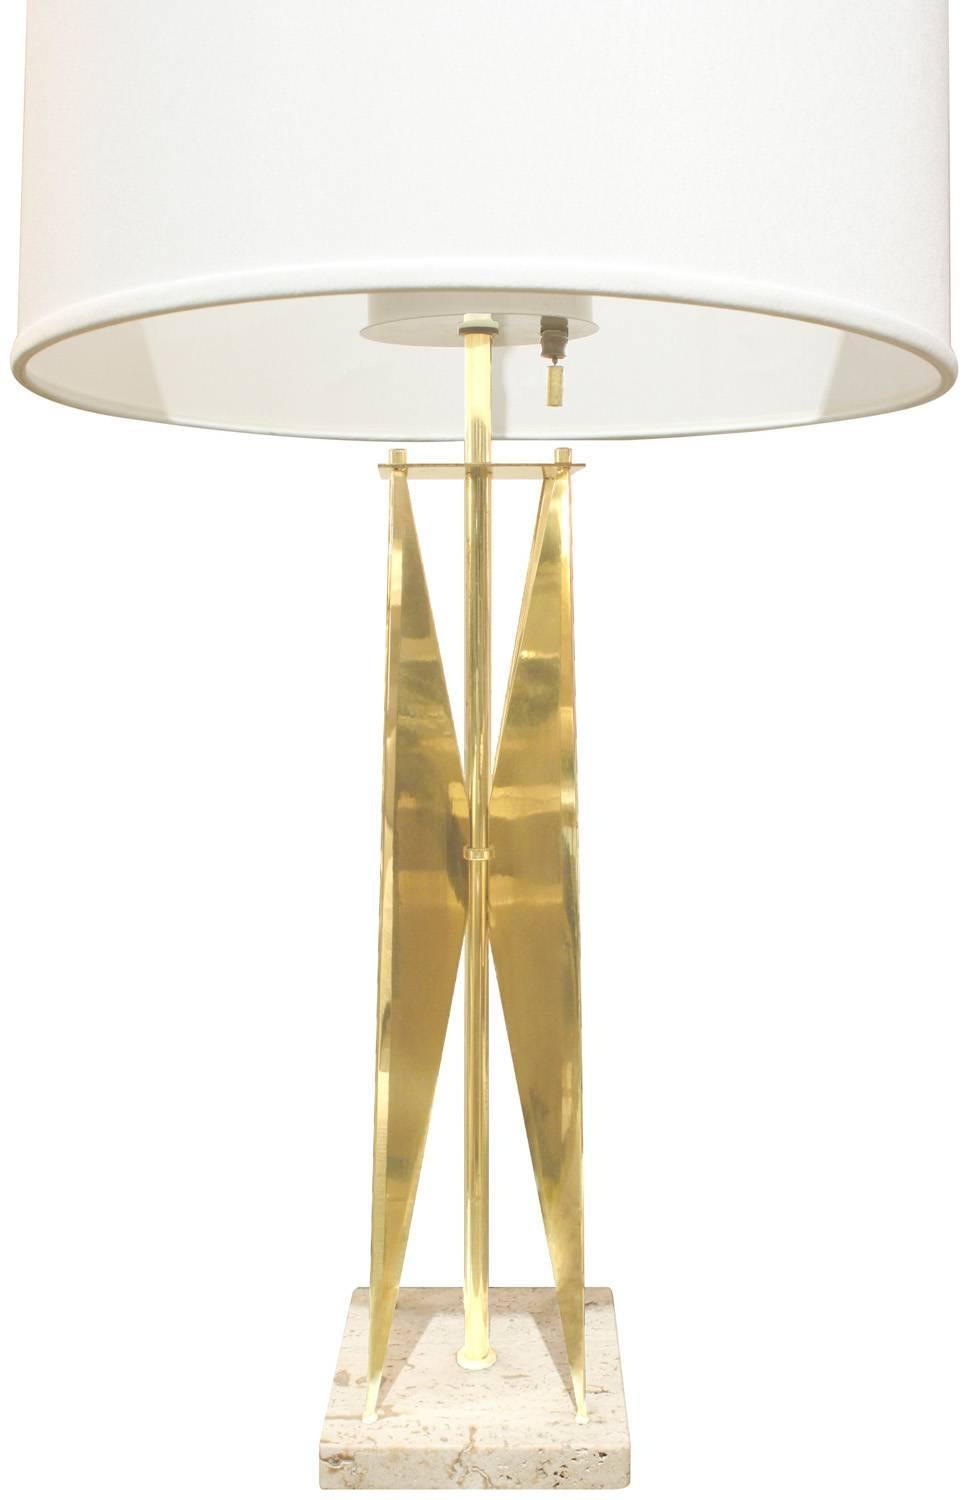 Sculptural table lamp in brass with travertine base and three bulb assembly by Gerald Thurston for Lightolier, American, 1950s.